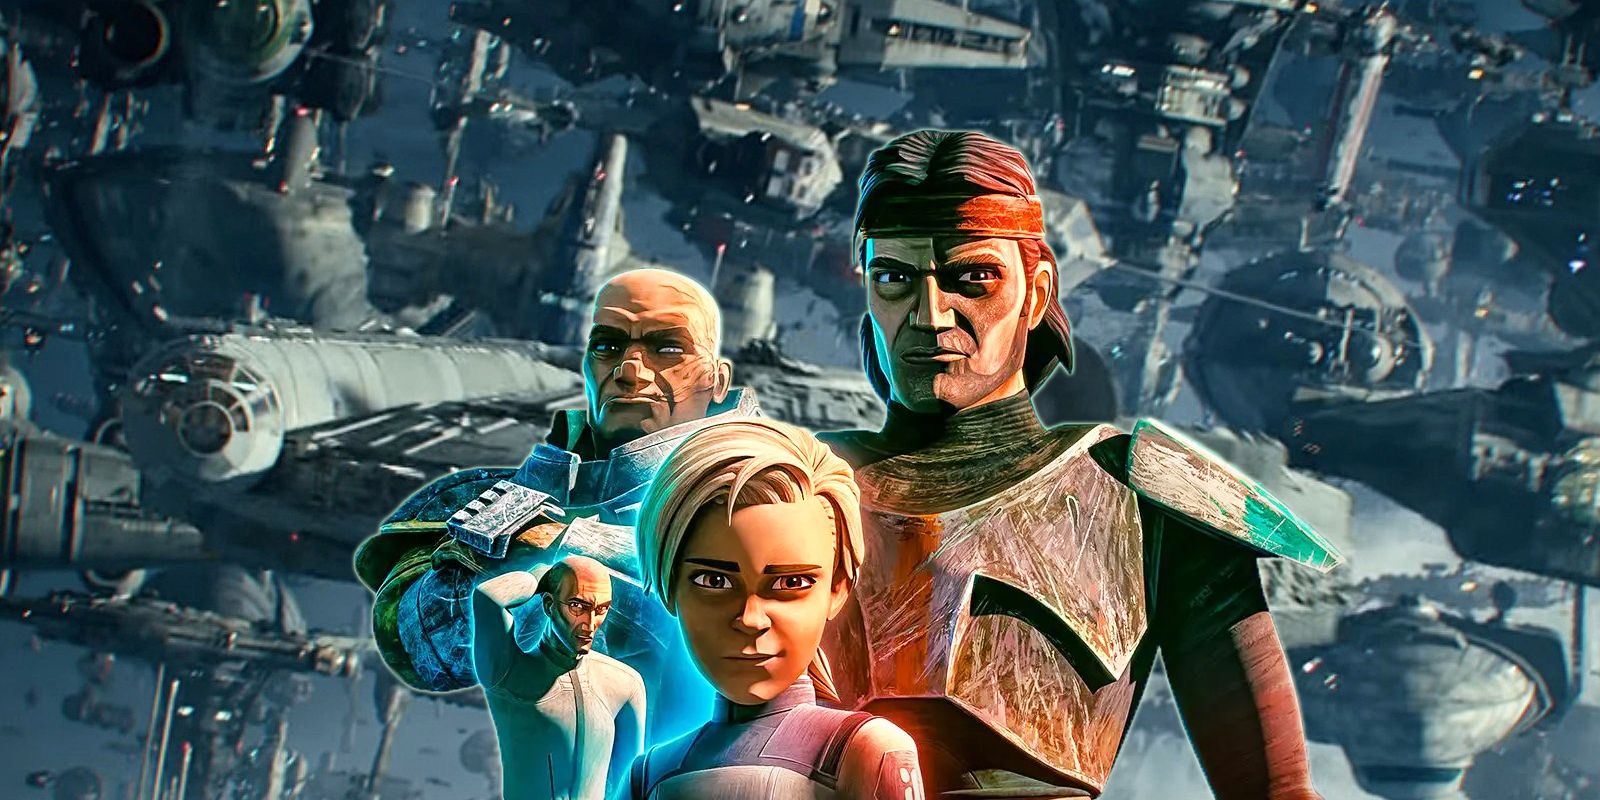 Star Wars: The Bad Batch's Omega, Hunter, Wrecker and Crosshair stand with Rise of Skywalker resistance fleet